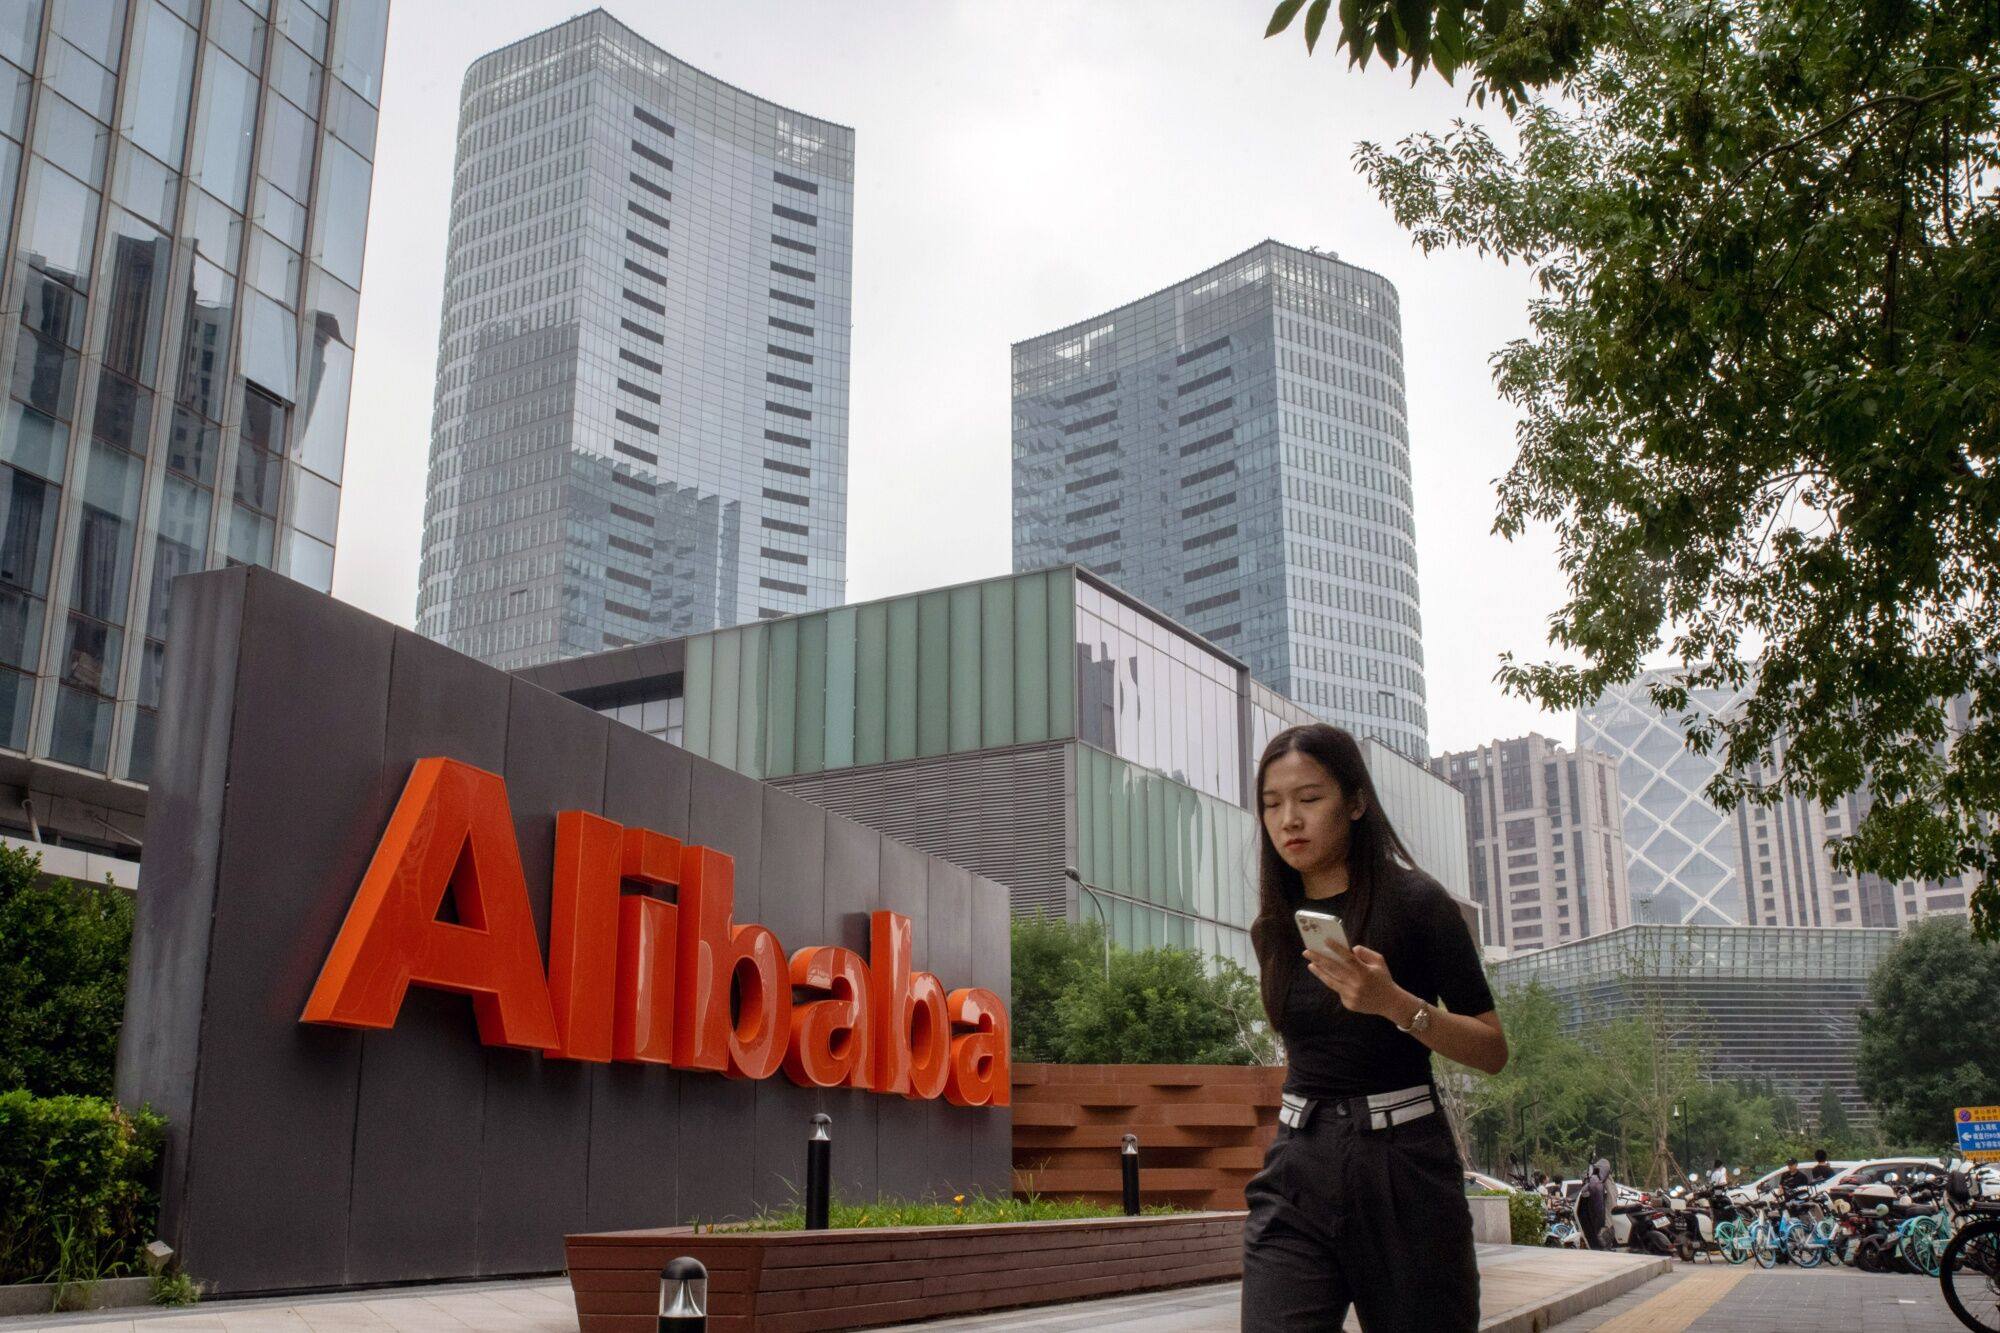 The Alibaba Group offices in Beijing. Photo: Bloomberg